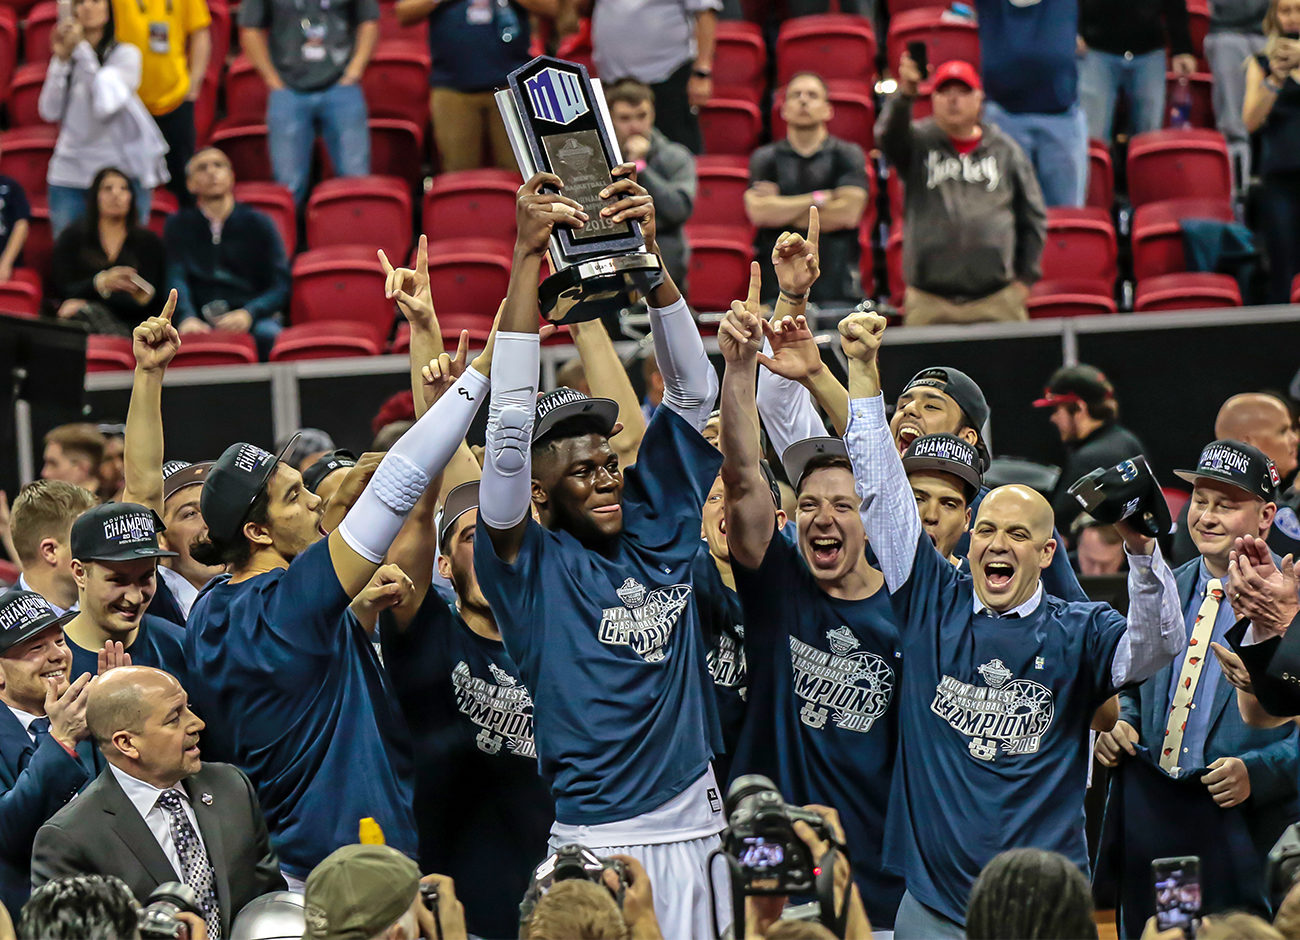 Team hoisting the Mountain West Championship Trophy